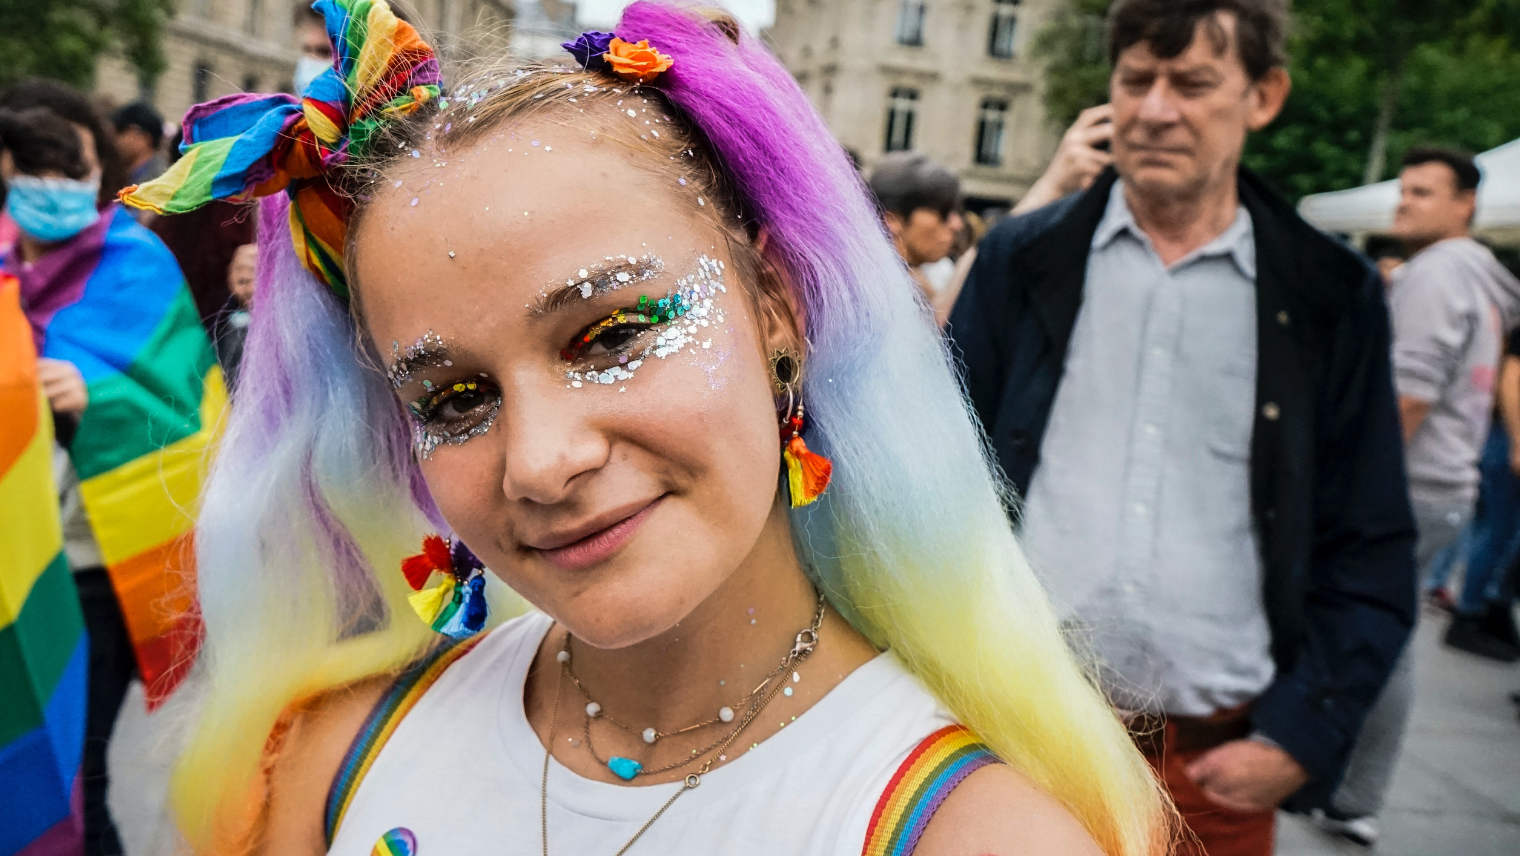 Image of a girl smiling at a Pride event